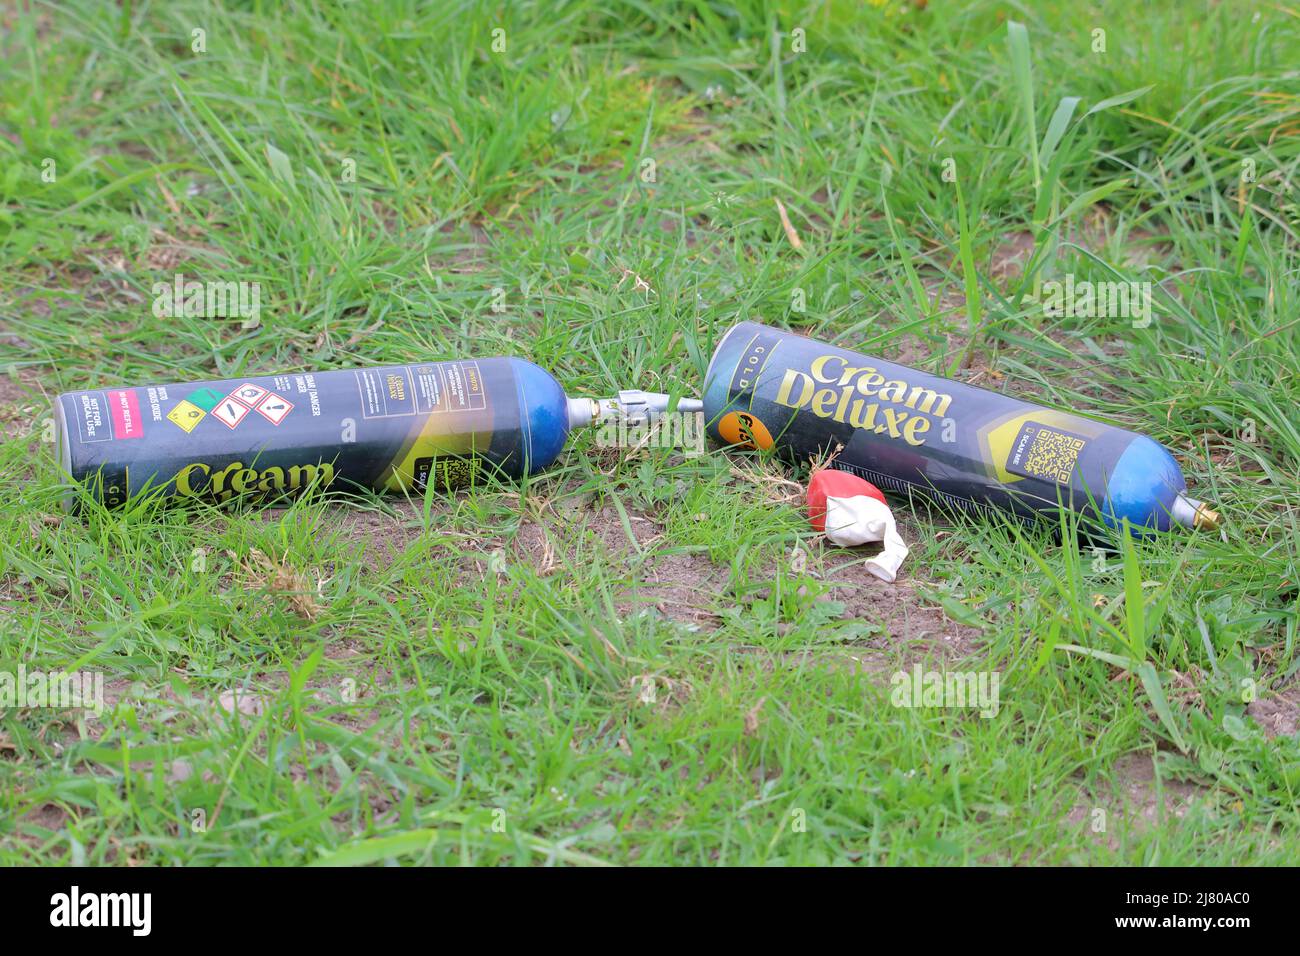 two aerosols cans of nitrous oxide (N2O) and a red and white balloon Stock Photo